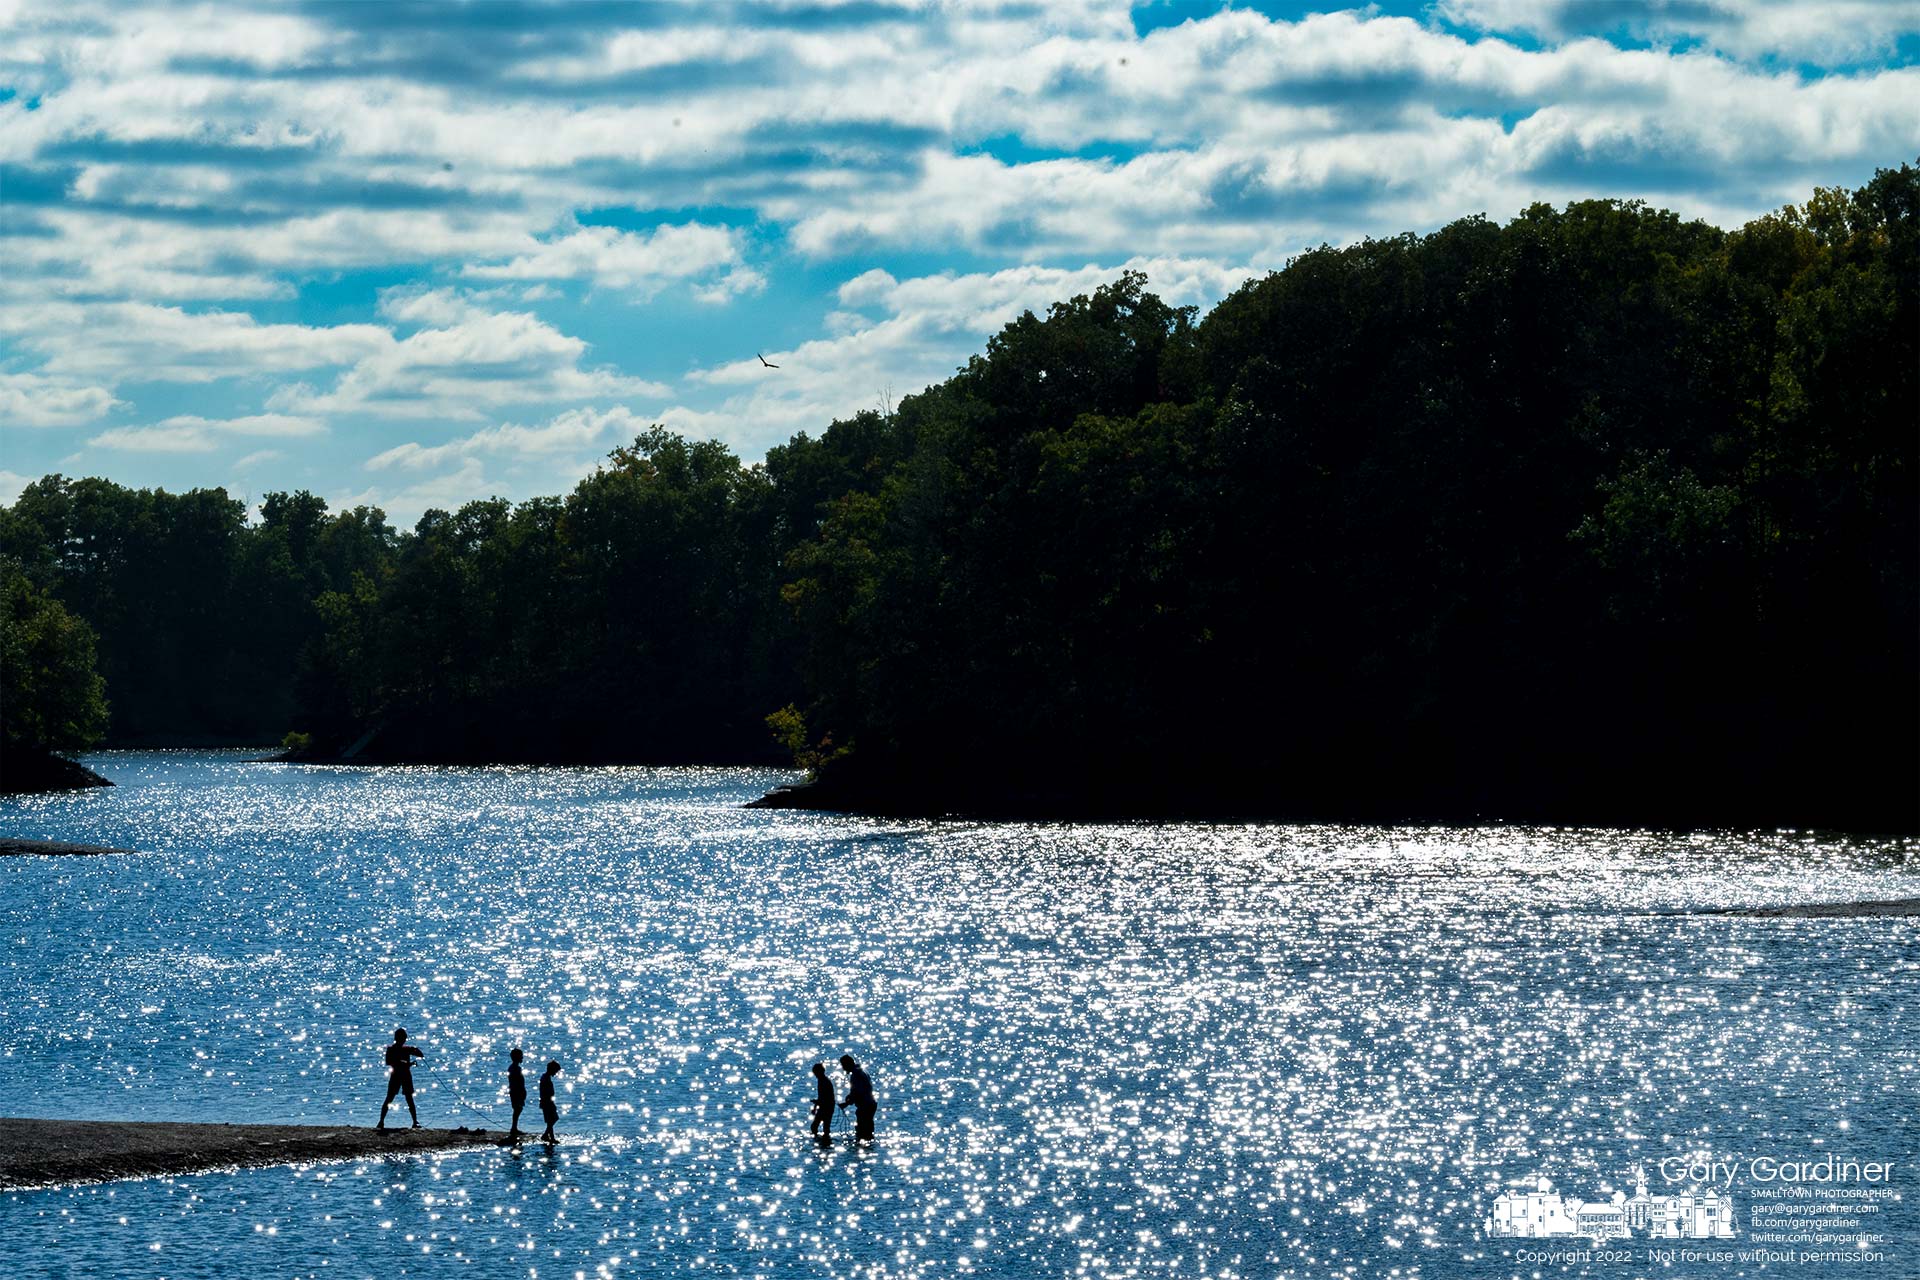 A family retrieves objects from the shallows at the Twin Bridges boat landing as the afternoon sun reflects in ripples formed by wind at Hoover Reservoir. My Final Photo for October 2, 2022.